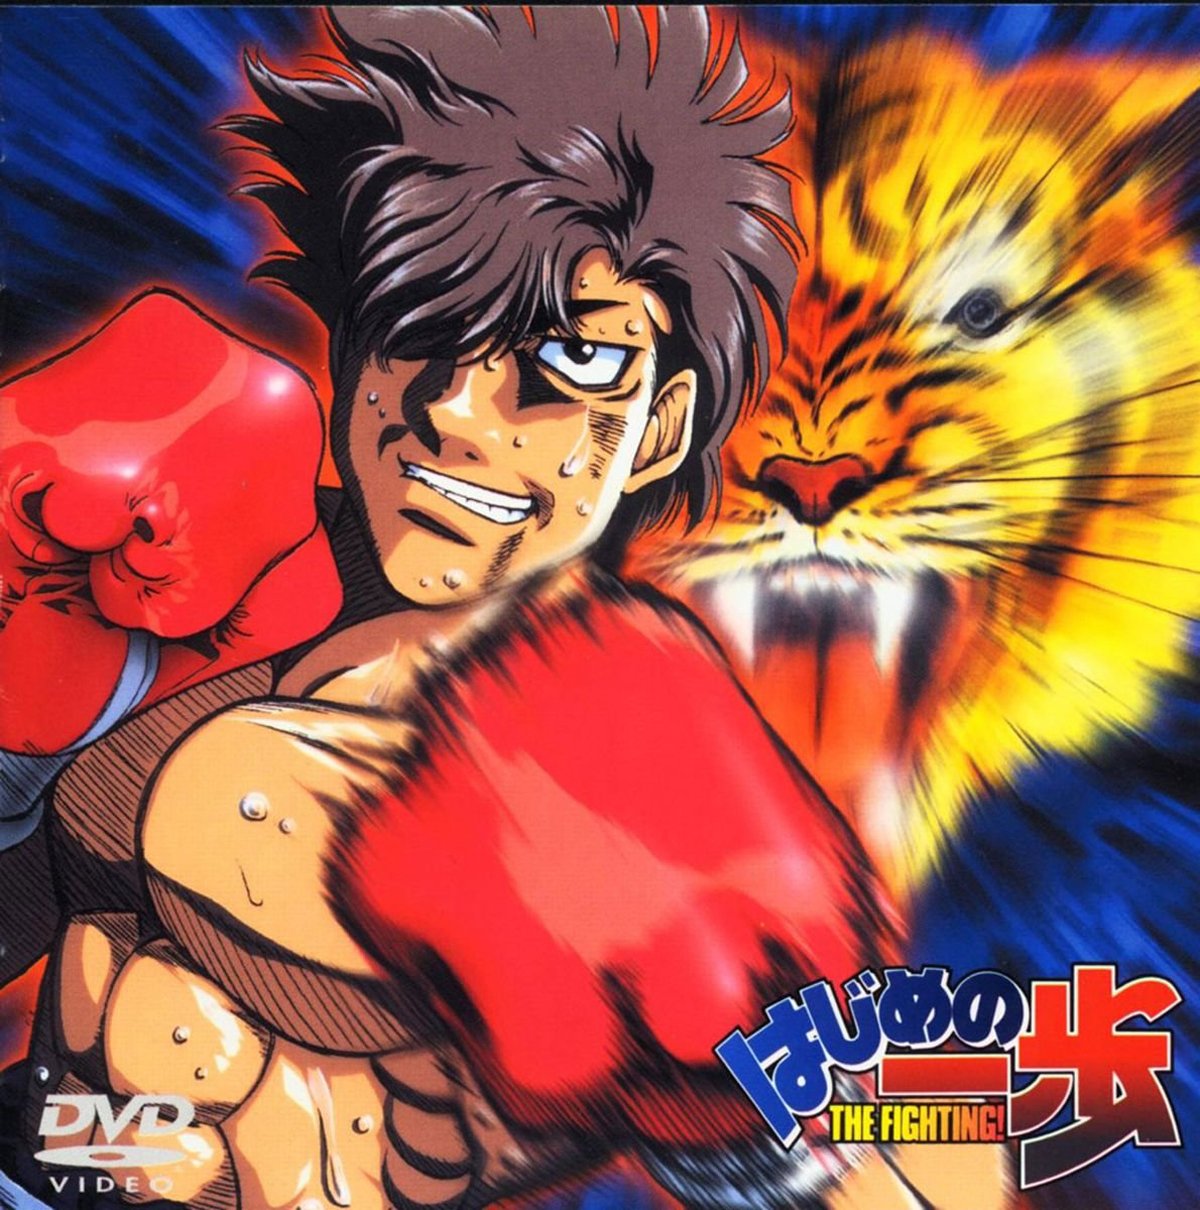 Hajime no Ippo and Scan Gallery